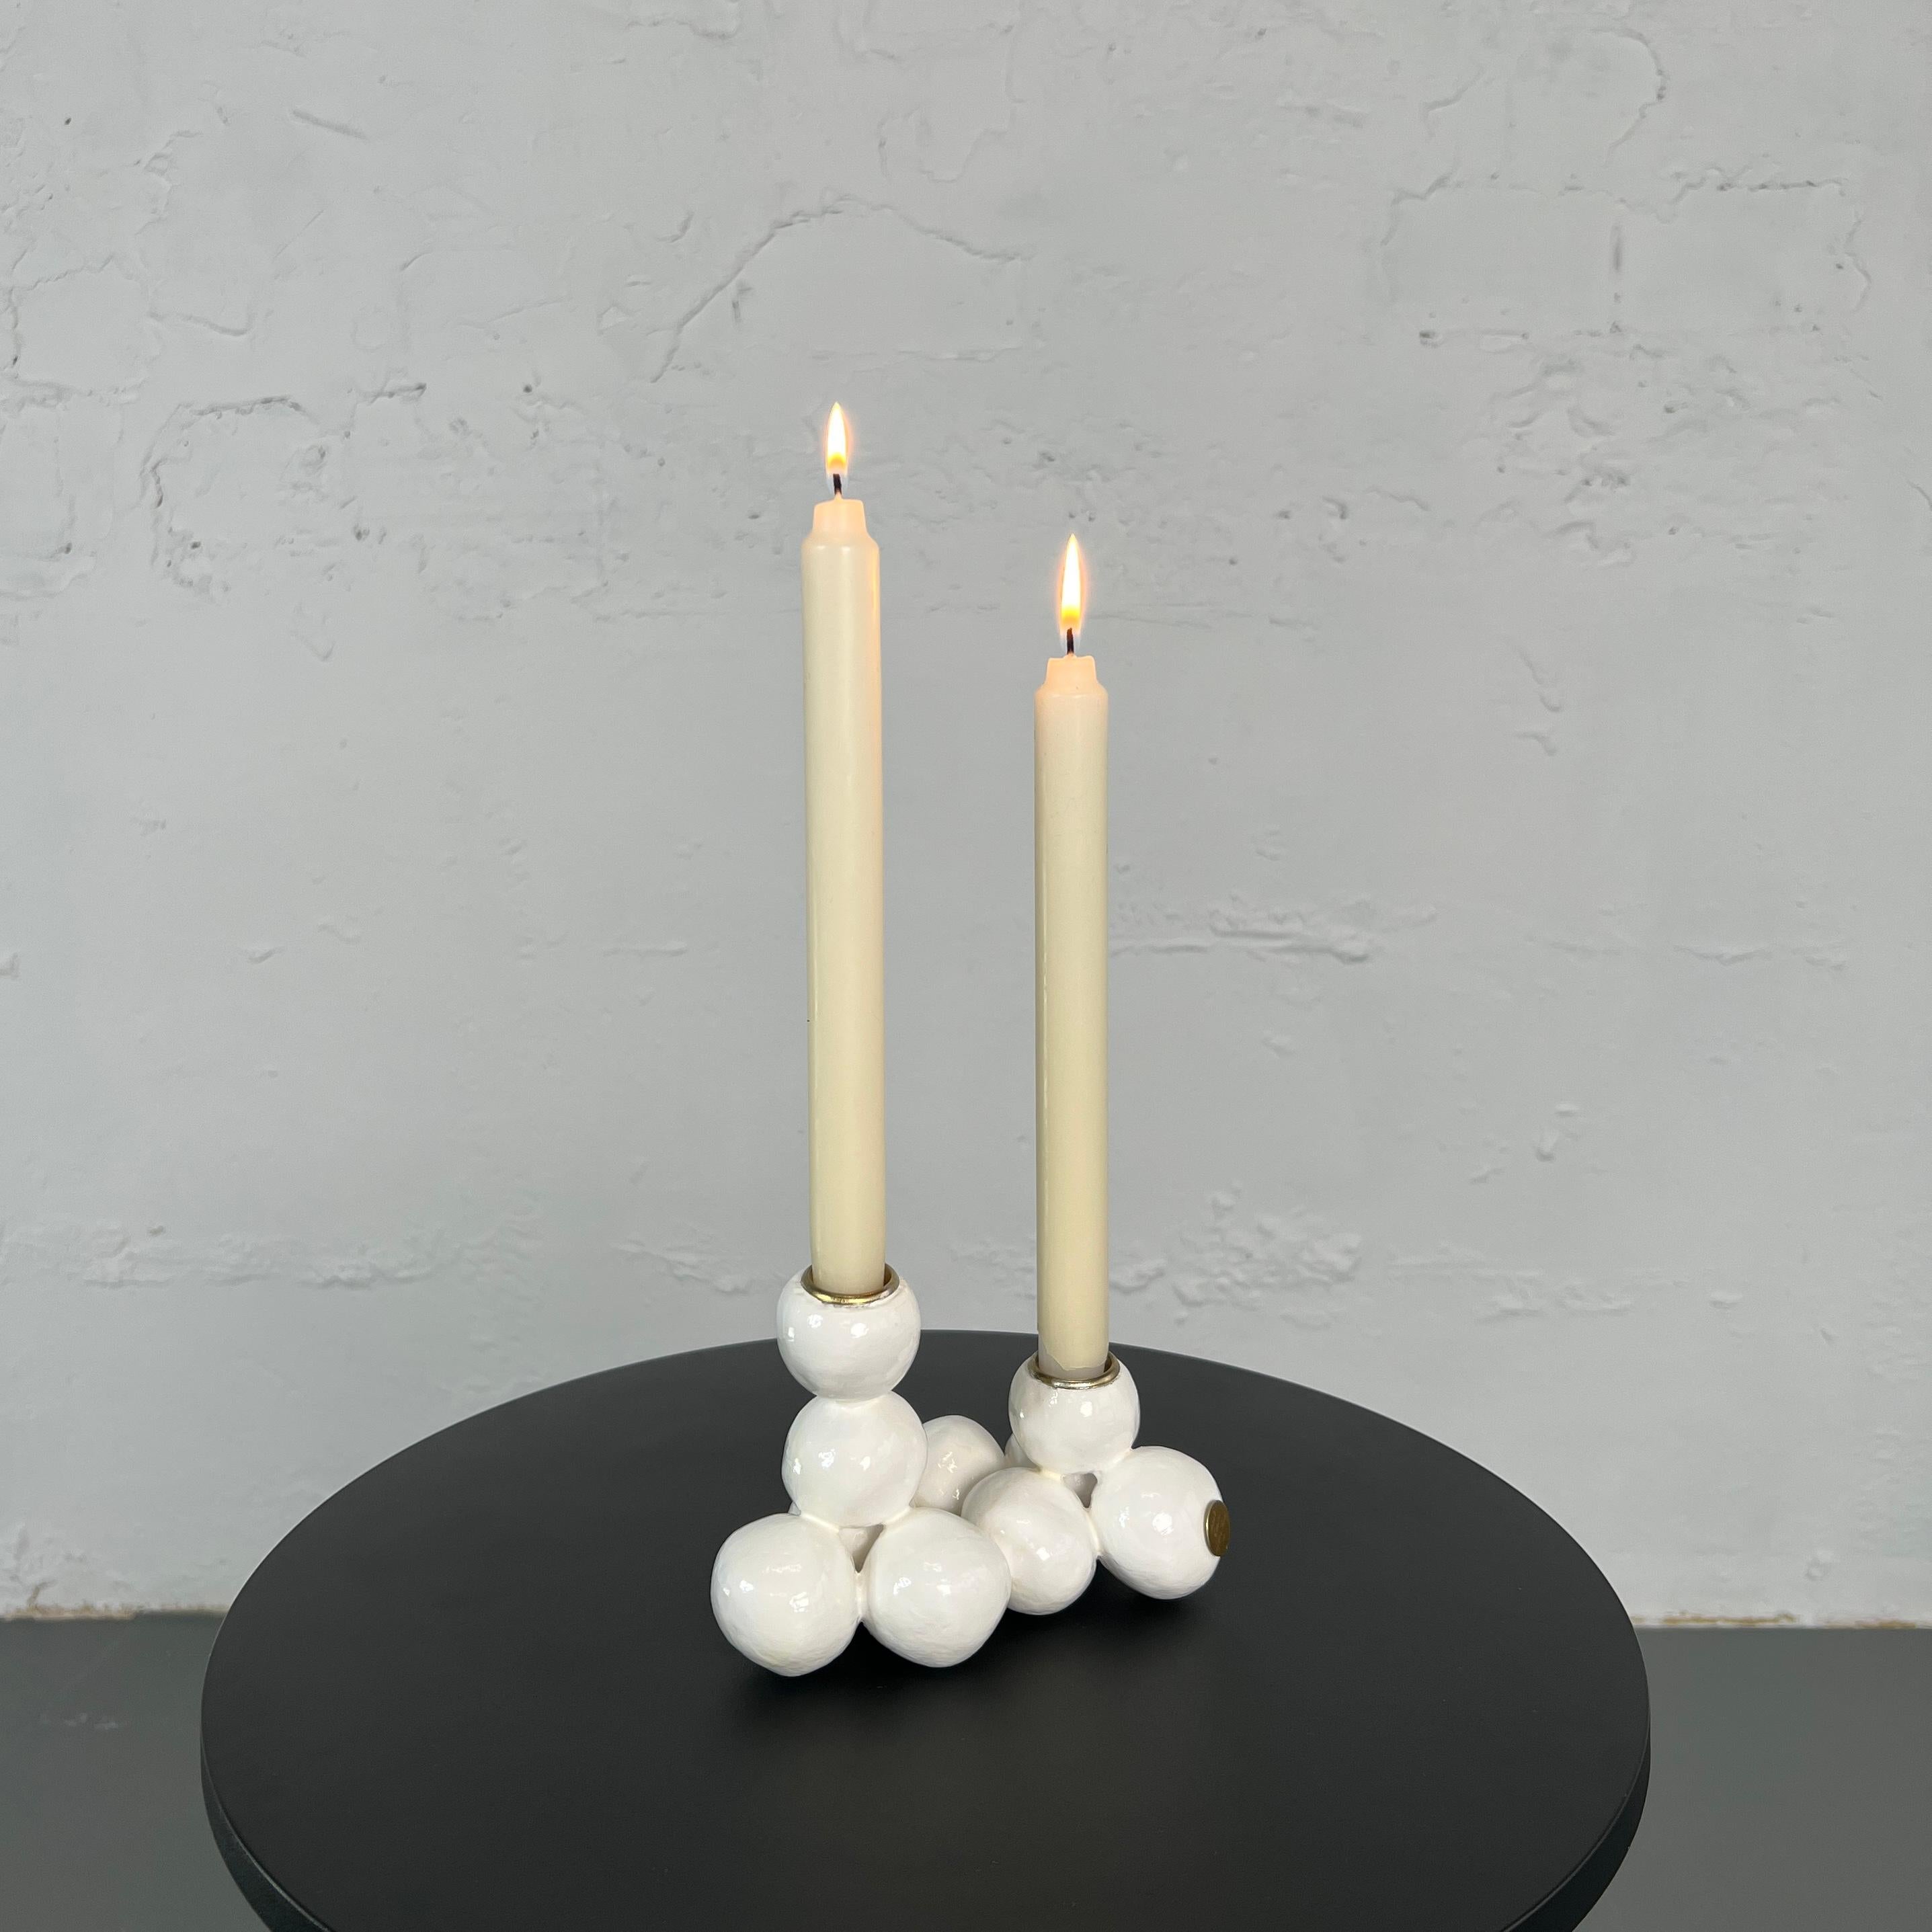 IRENA TONE Abstract Sculpture - Arty White Candleholder "Small Pearls" for 2 Candles Sphere Original Sculpture